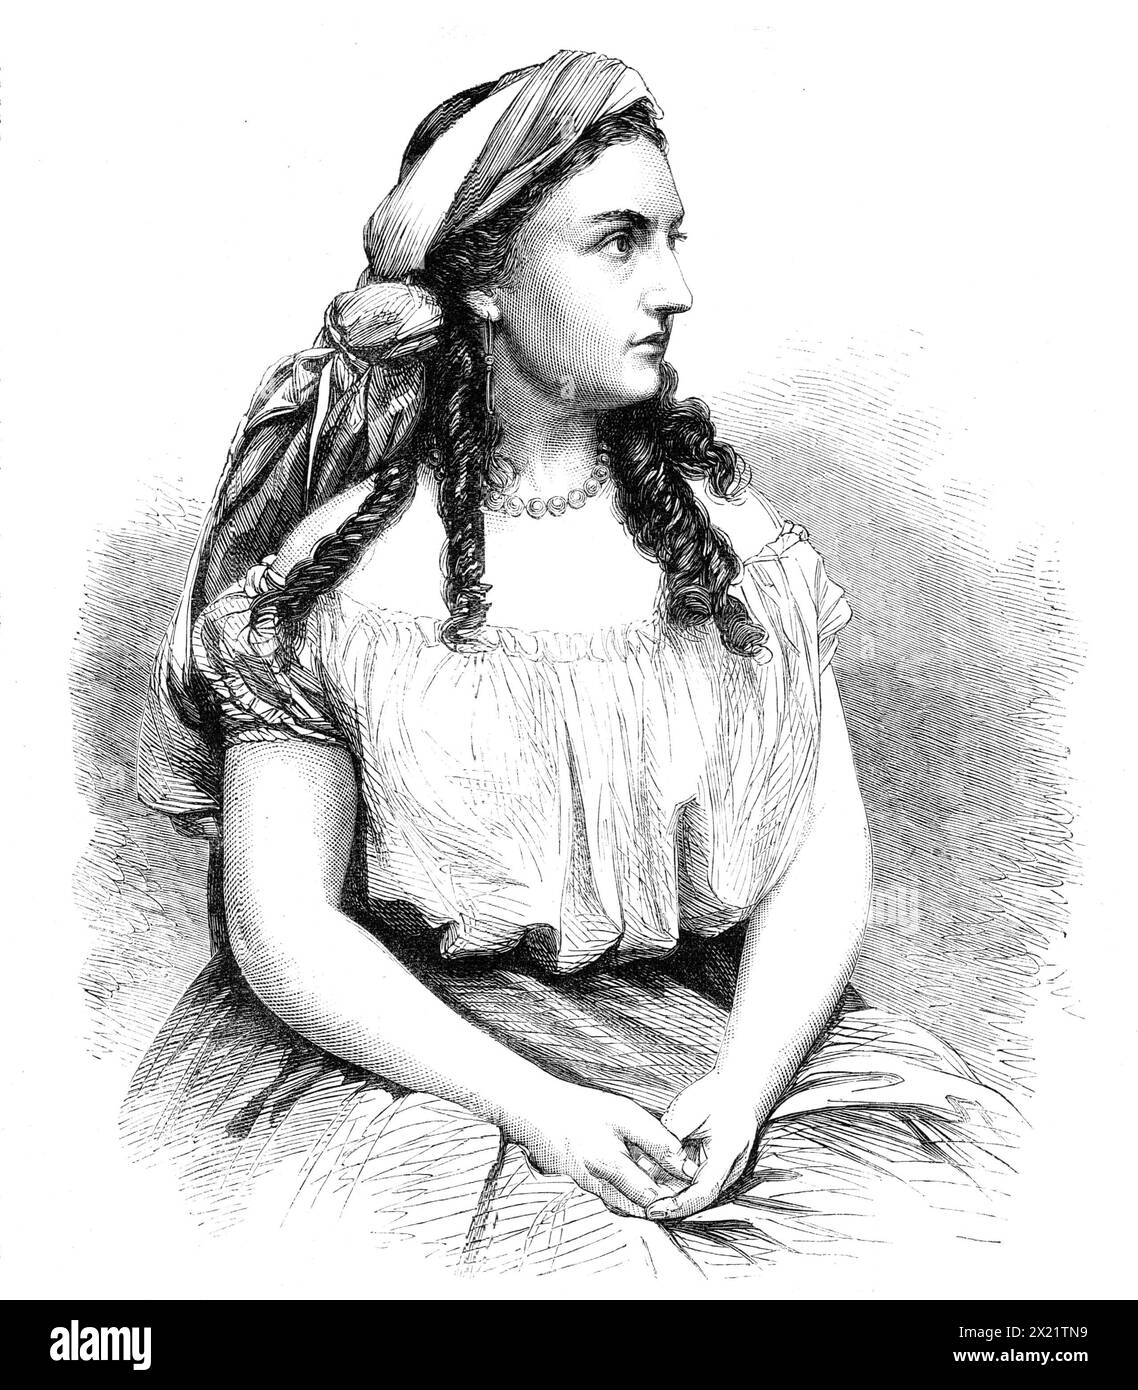 Miss Bateman as Leah, at the Adelphi Theatre, 1864. 'We have engraved the Portrait of Miss Bateman, in her well- known character of Leah, which has during the past winter been performed more than a hundred and fifty times, at the Adelphi Theatre. Many thousands of the London playgoers have been enchanted with the power and grace of this touching dramatic representation, the effect of which can be compared to nothing of its kind upon the stage of late years, except the noblest efforts of Adelaide Ristori. Miss Kate Josephine Bateman was born at Baltimore in 1842. She was a precocious child, one Stock Photo